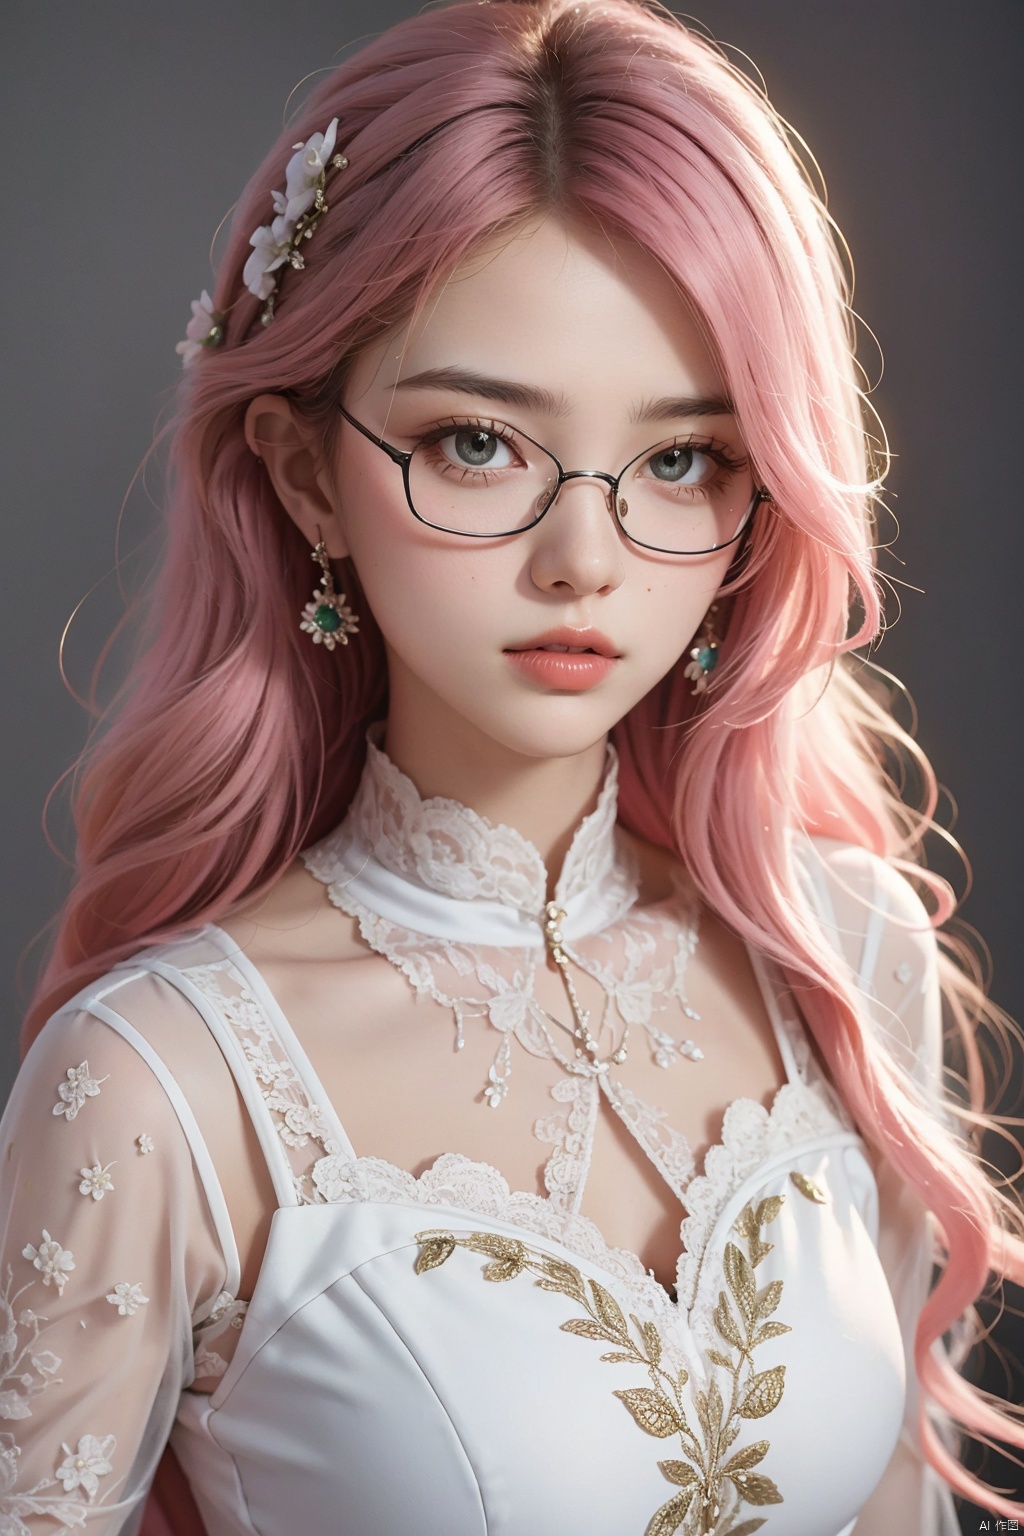 masterpiece,best quality,intricate details,thin,slim,beautiful girl,white skin,sharp jawline,messy hair,lips,upper body,close up,smirk,pink hair,green eyes,black rimmed glasses,lace dress,sexy,